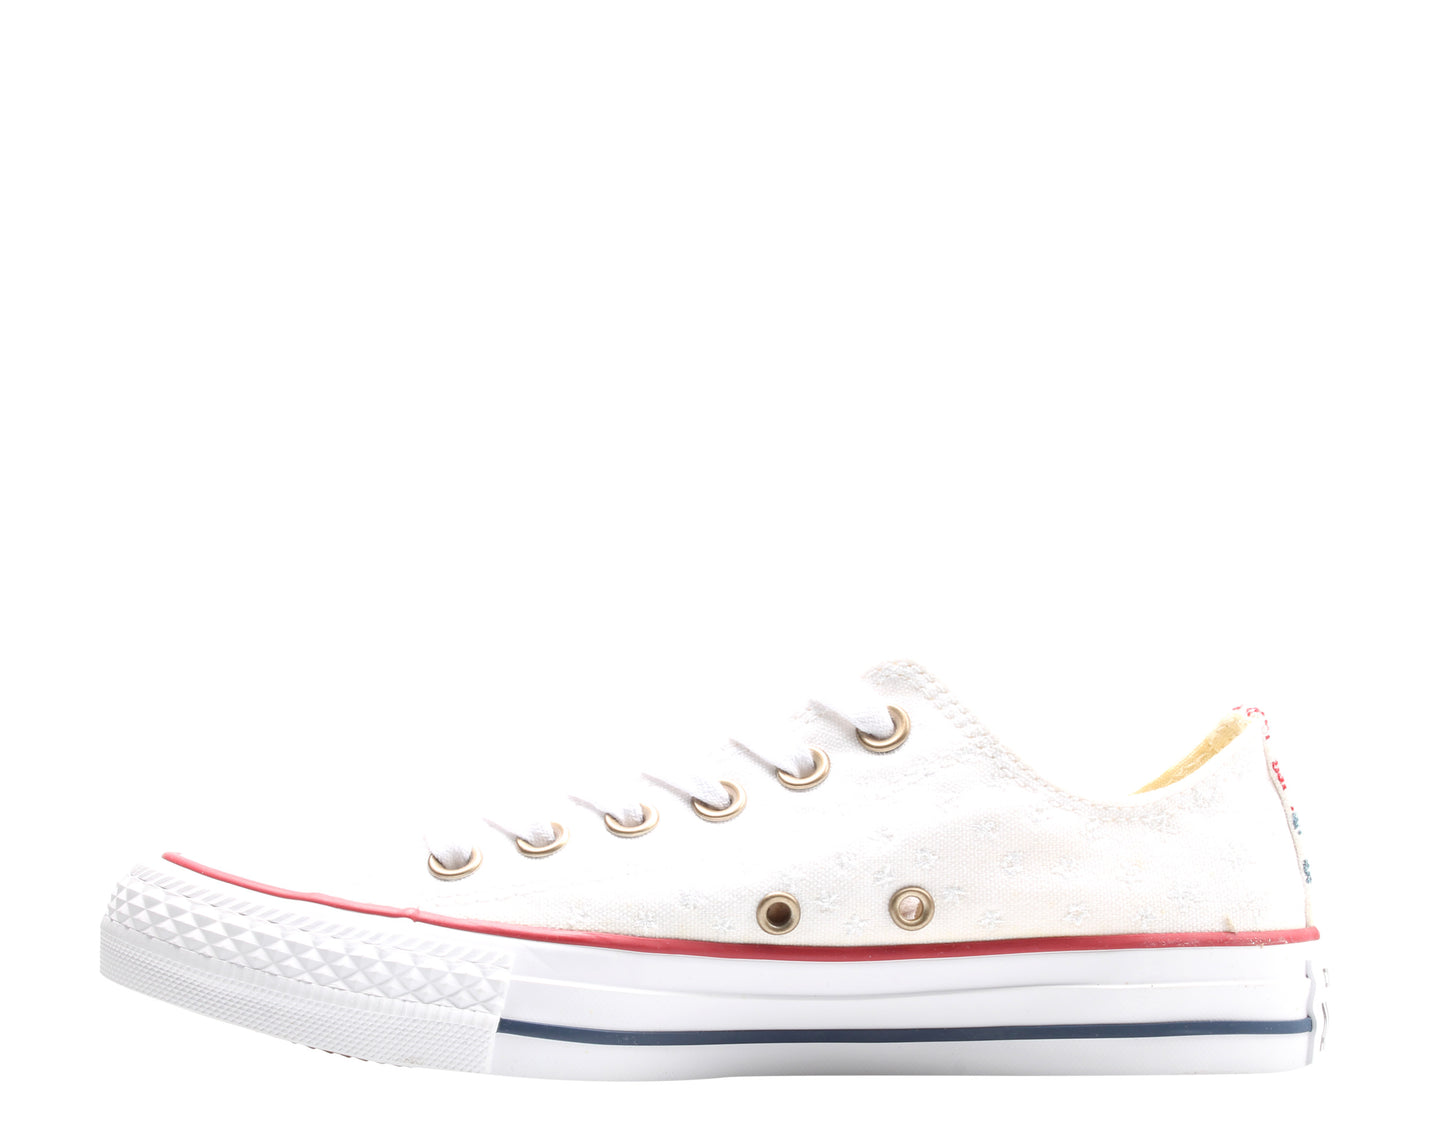 Converse Chuck Taylor All Star Ox Stitch Stars White Women's Sneakers 555882C